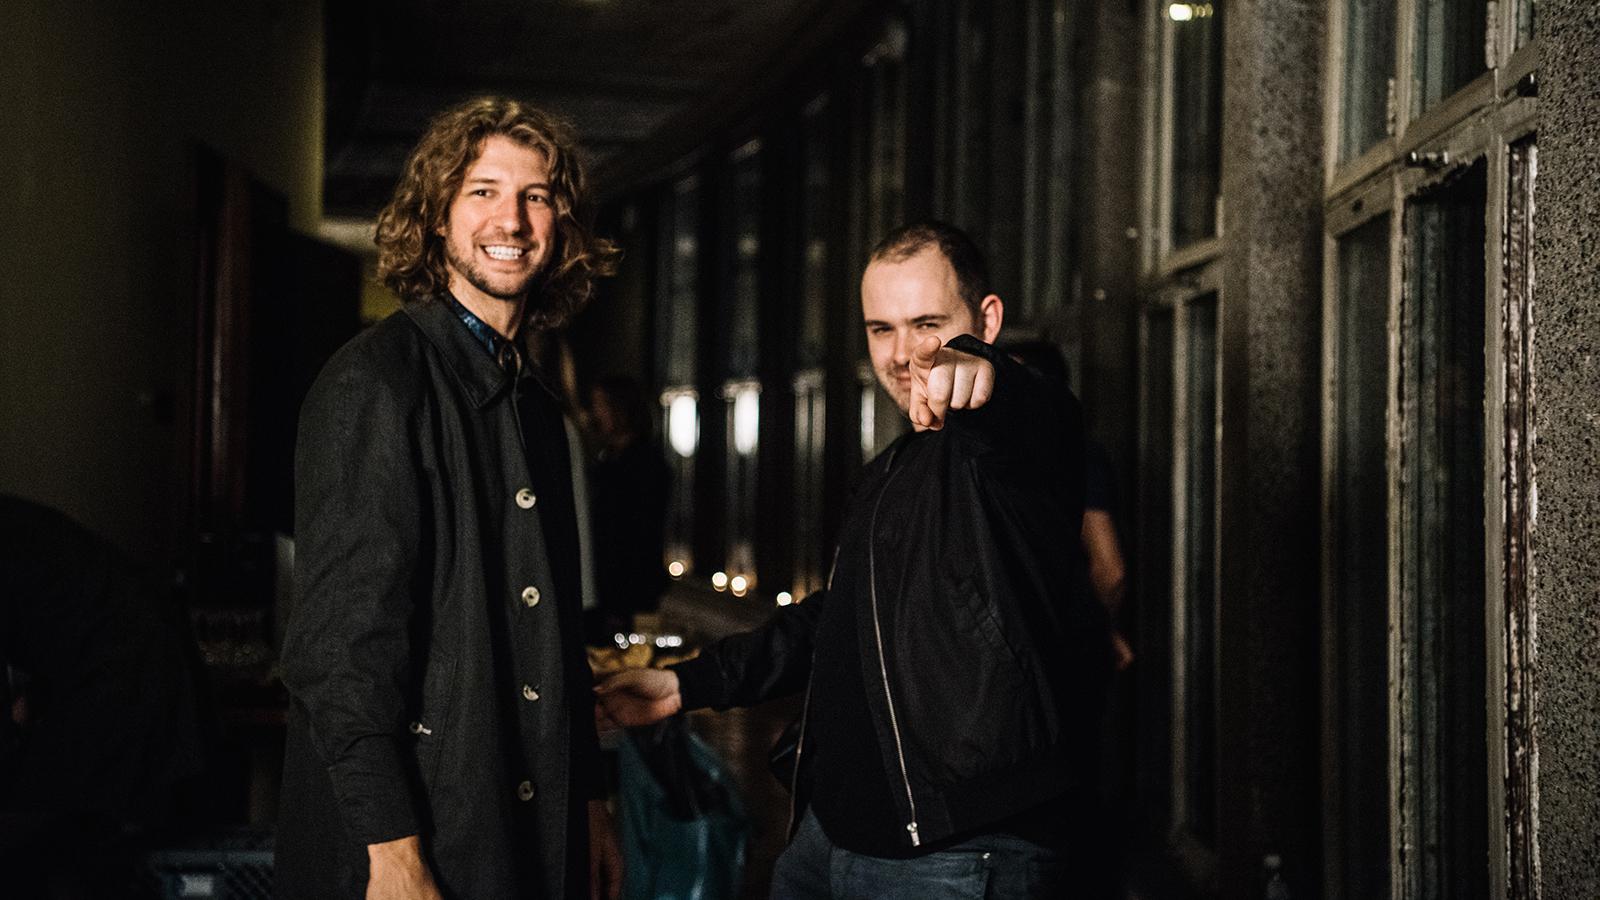 2017 — Robert Raths and Ben Lukas Boysen - Nils Frahm All Melody Listening Session at Funkhaus Berlin - photo by Claudia Goedke